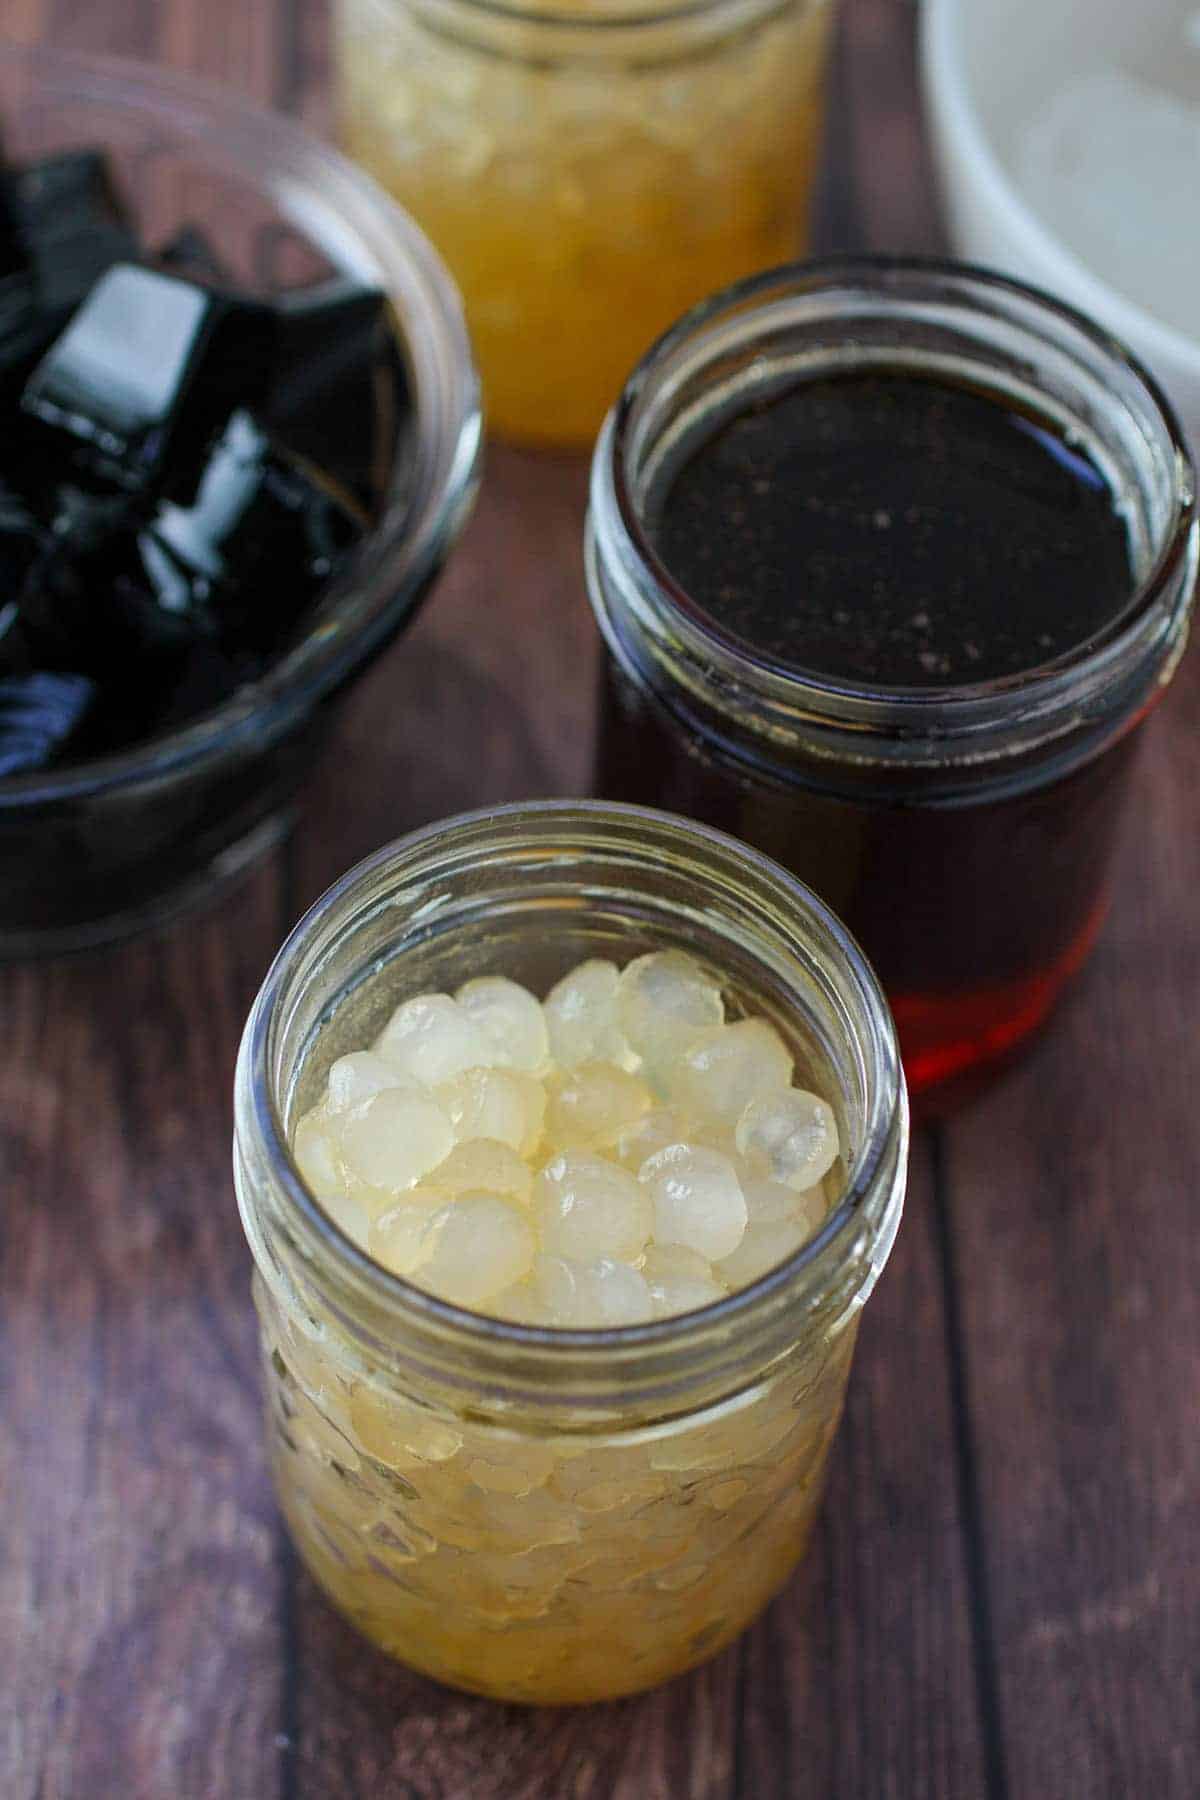 cooked sago and arnibal syrup in jars and black jelly cubes in a bowl